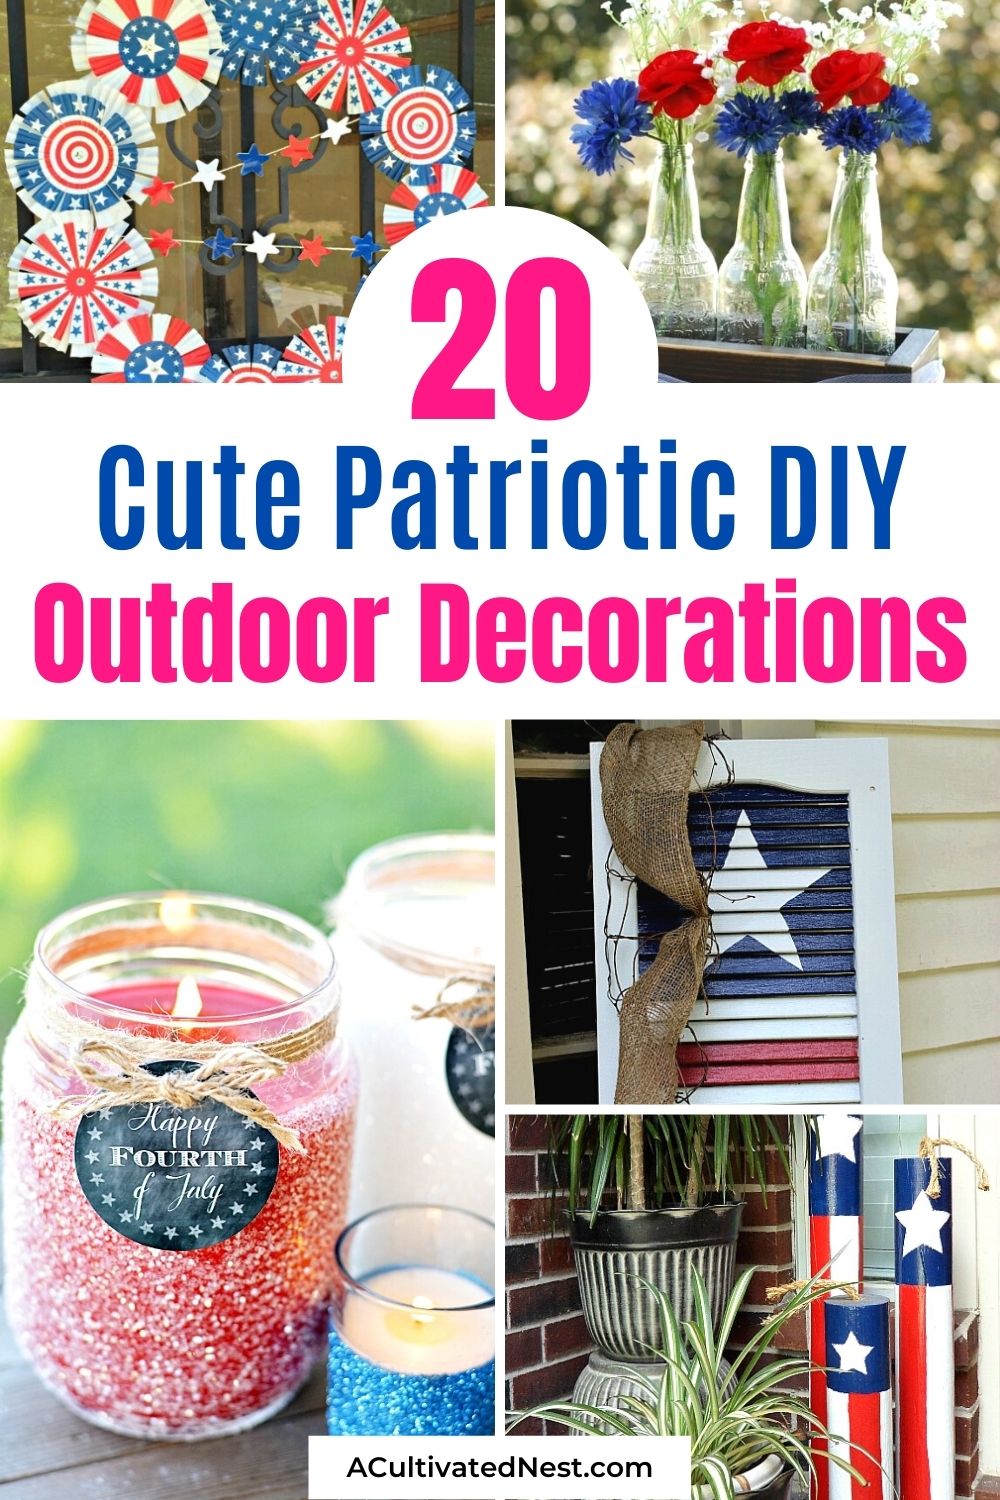 20 Cute DIY Patriotic Outdoor Decorations- You can make your yard or front porch extra festive this year with these DIY patriotic outdoor decorations! They're perfect for Memorial Day or the Fourth of July! | Fourth of July decorations, Memorial Day decorations, flag themed décor #FourthOfJuly #MemorialDay #DIY #patrioticDIY #ACultivatedNest